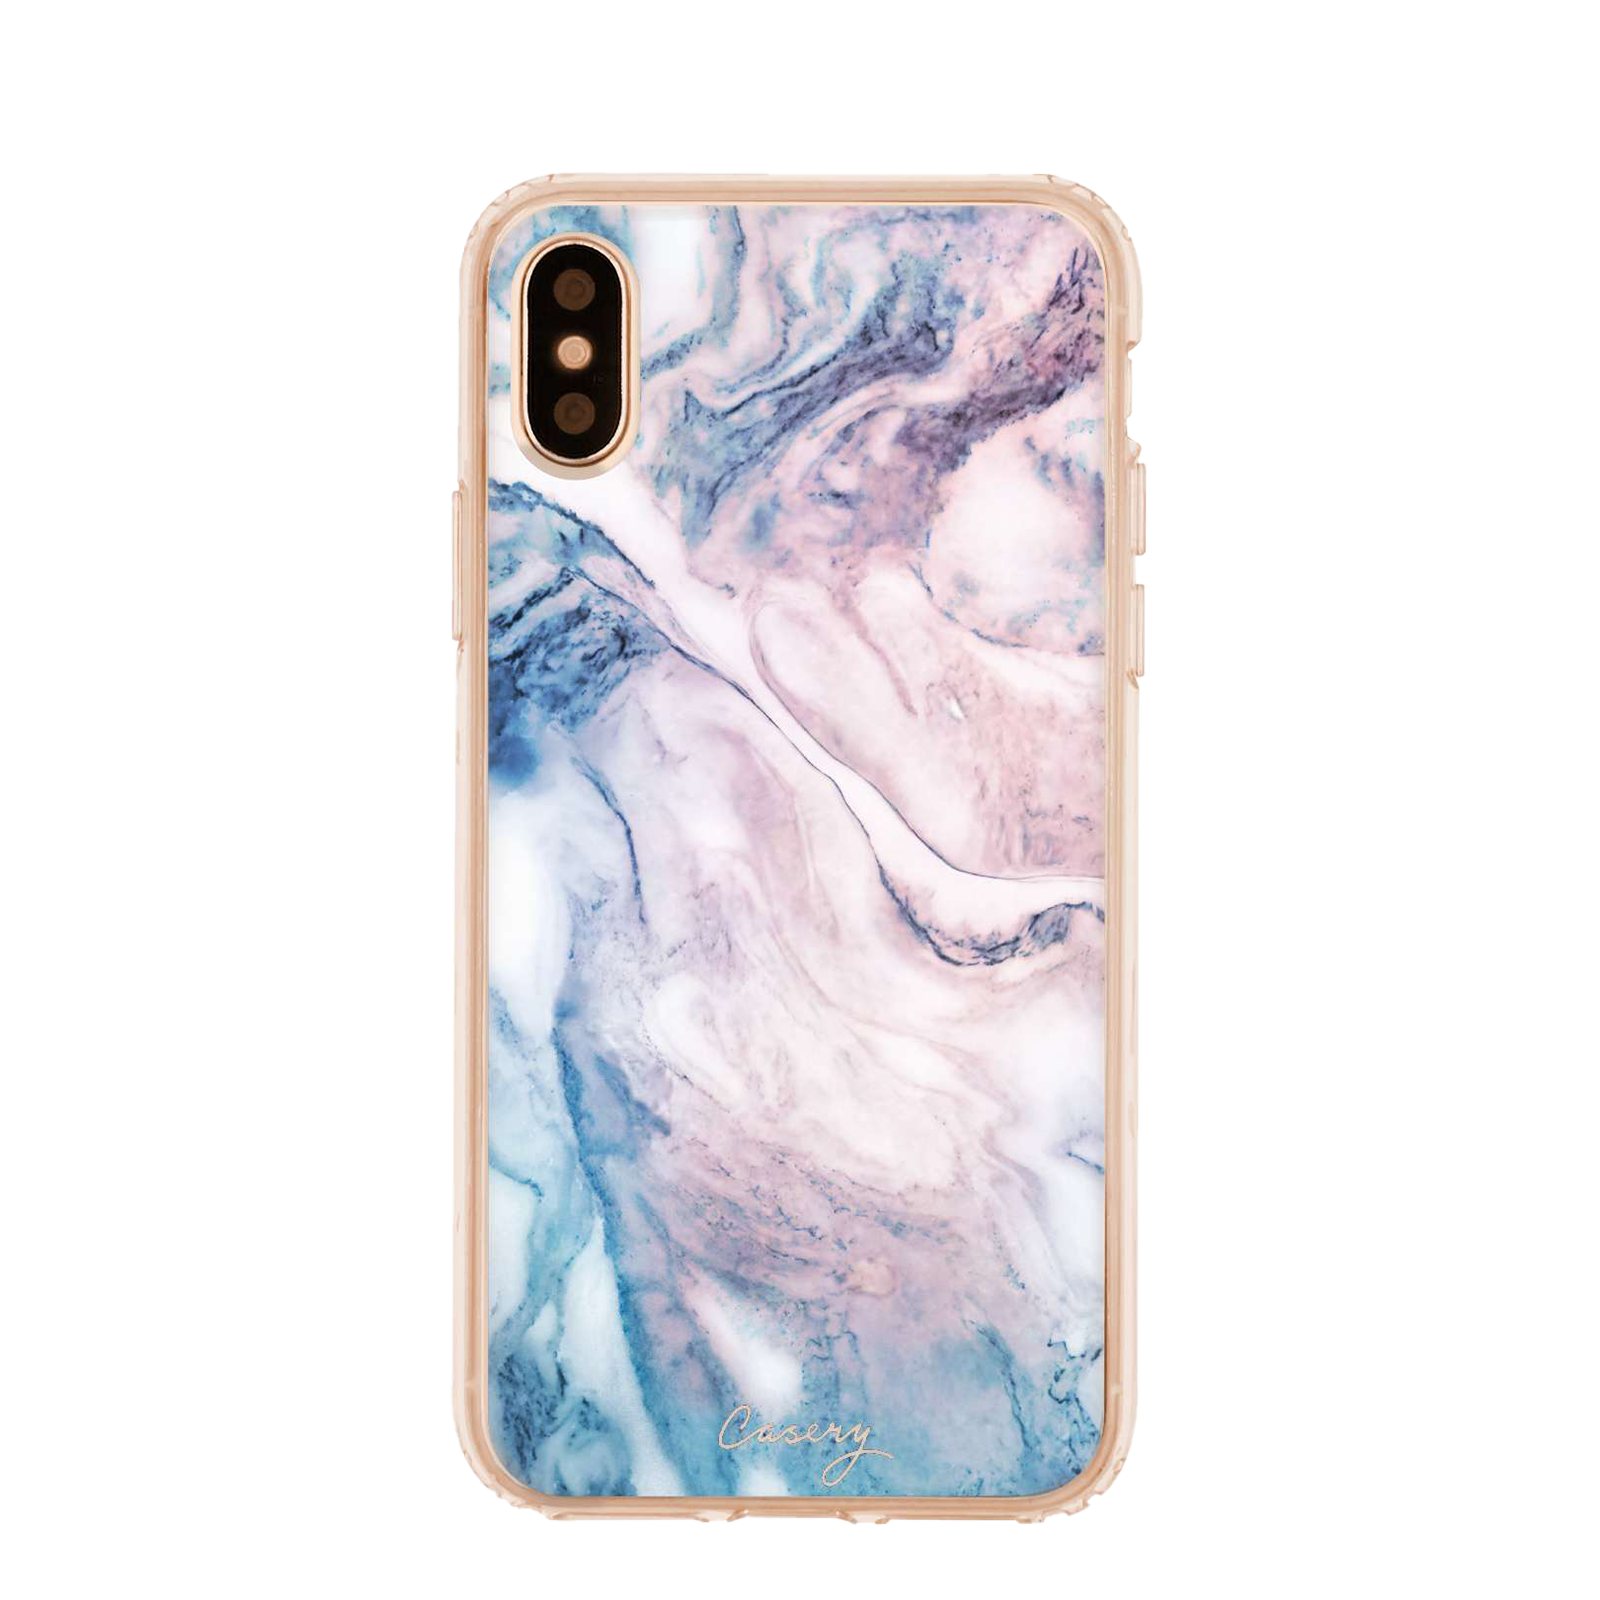 Cloudy Marble iPhone Case